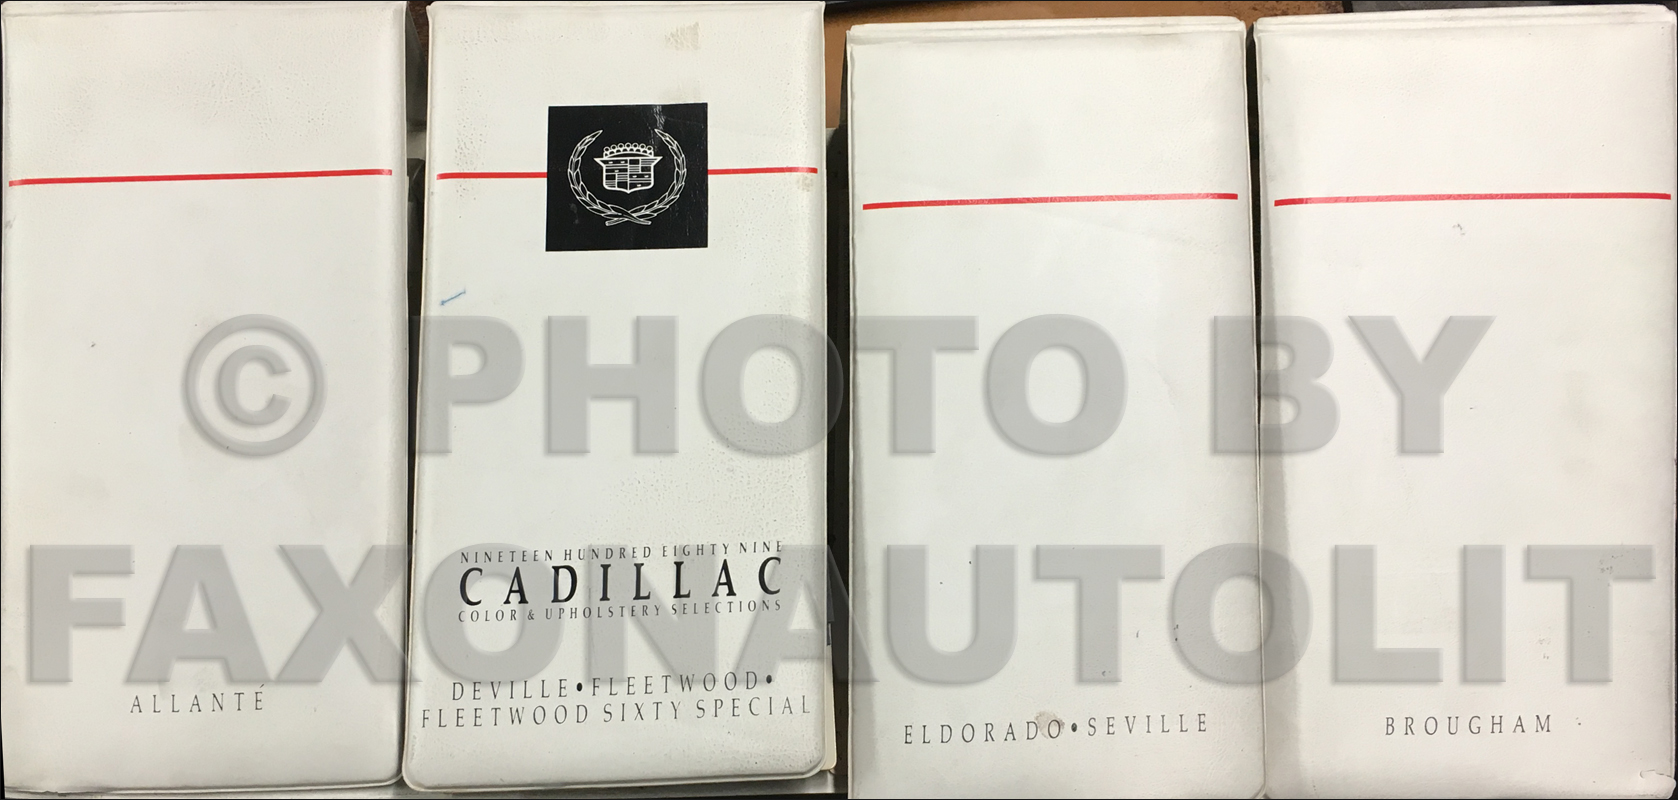 1989 Cadillac Color and Upholstery Dealer Album